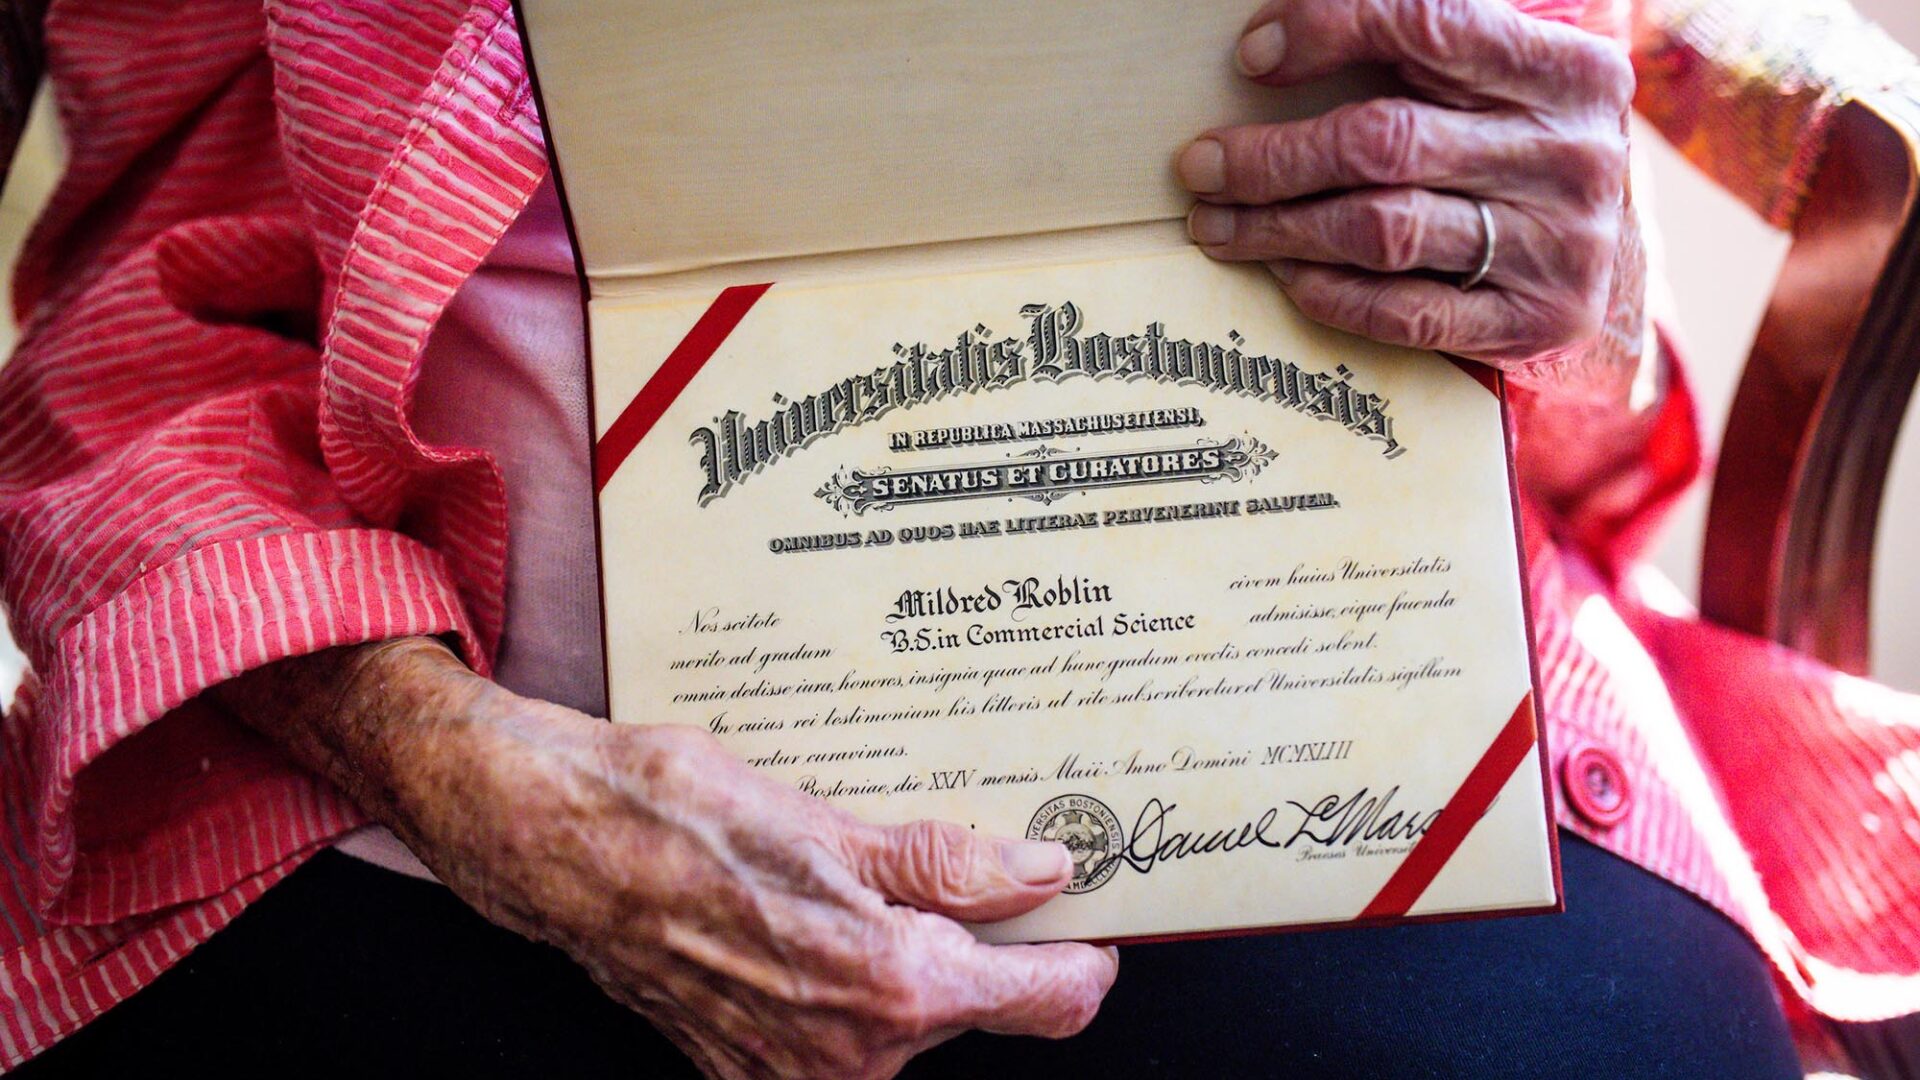 Photo: A pair of wrinkled hands hold an old Boston University Diploma, with red casing and formal letterhead